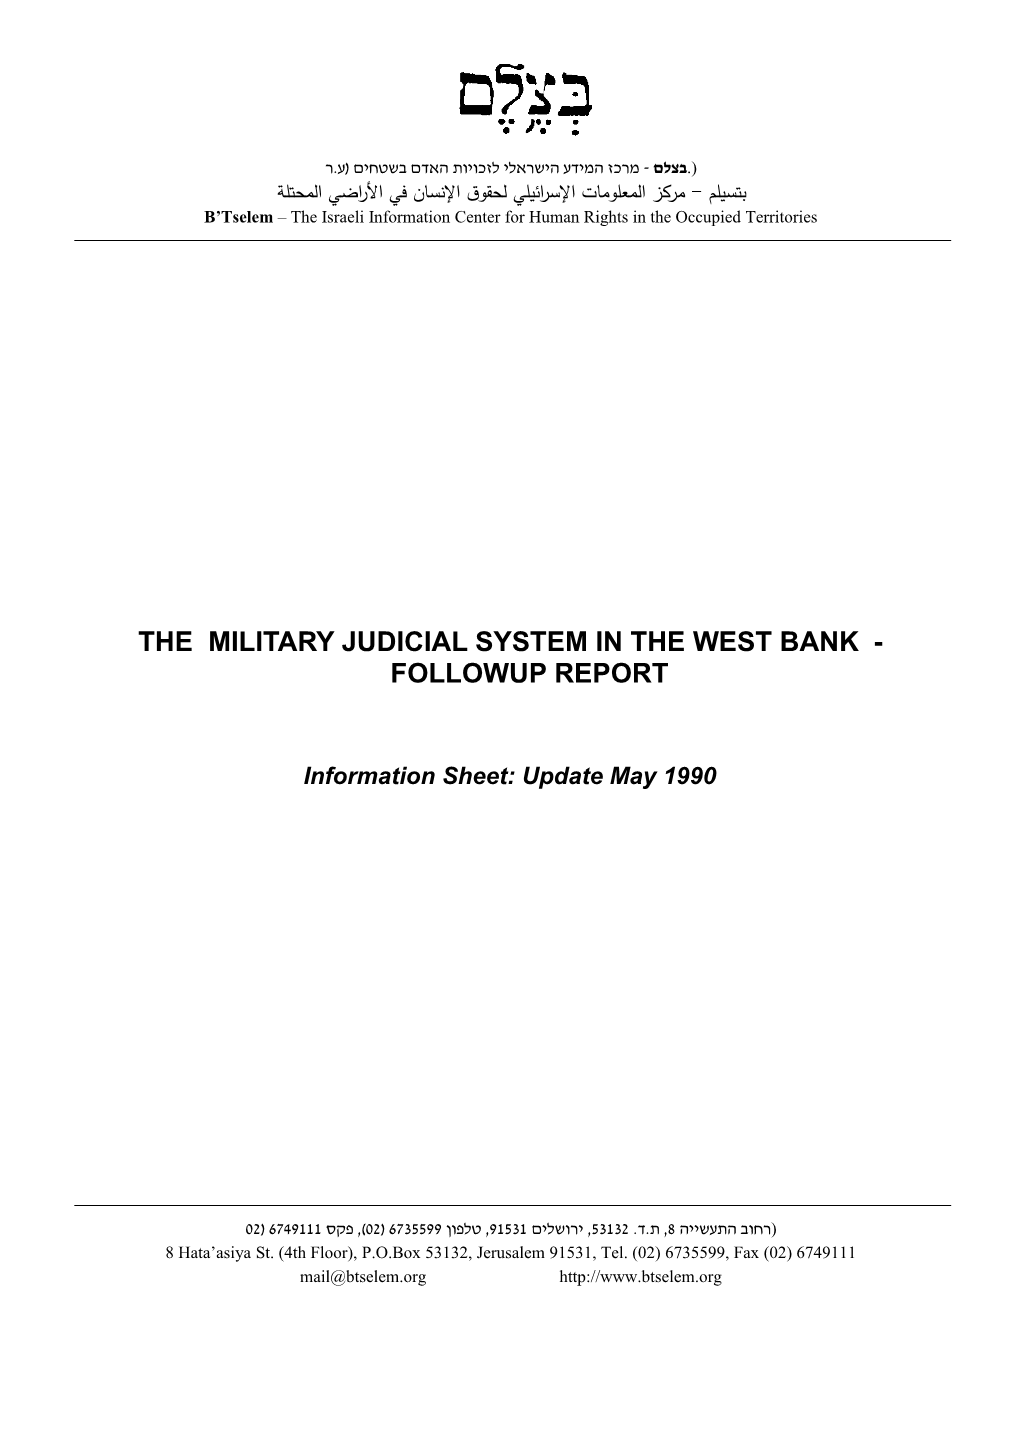 B'tselem Report: the Military Judicial System in the Westbank - Followup Report, Information